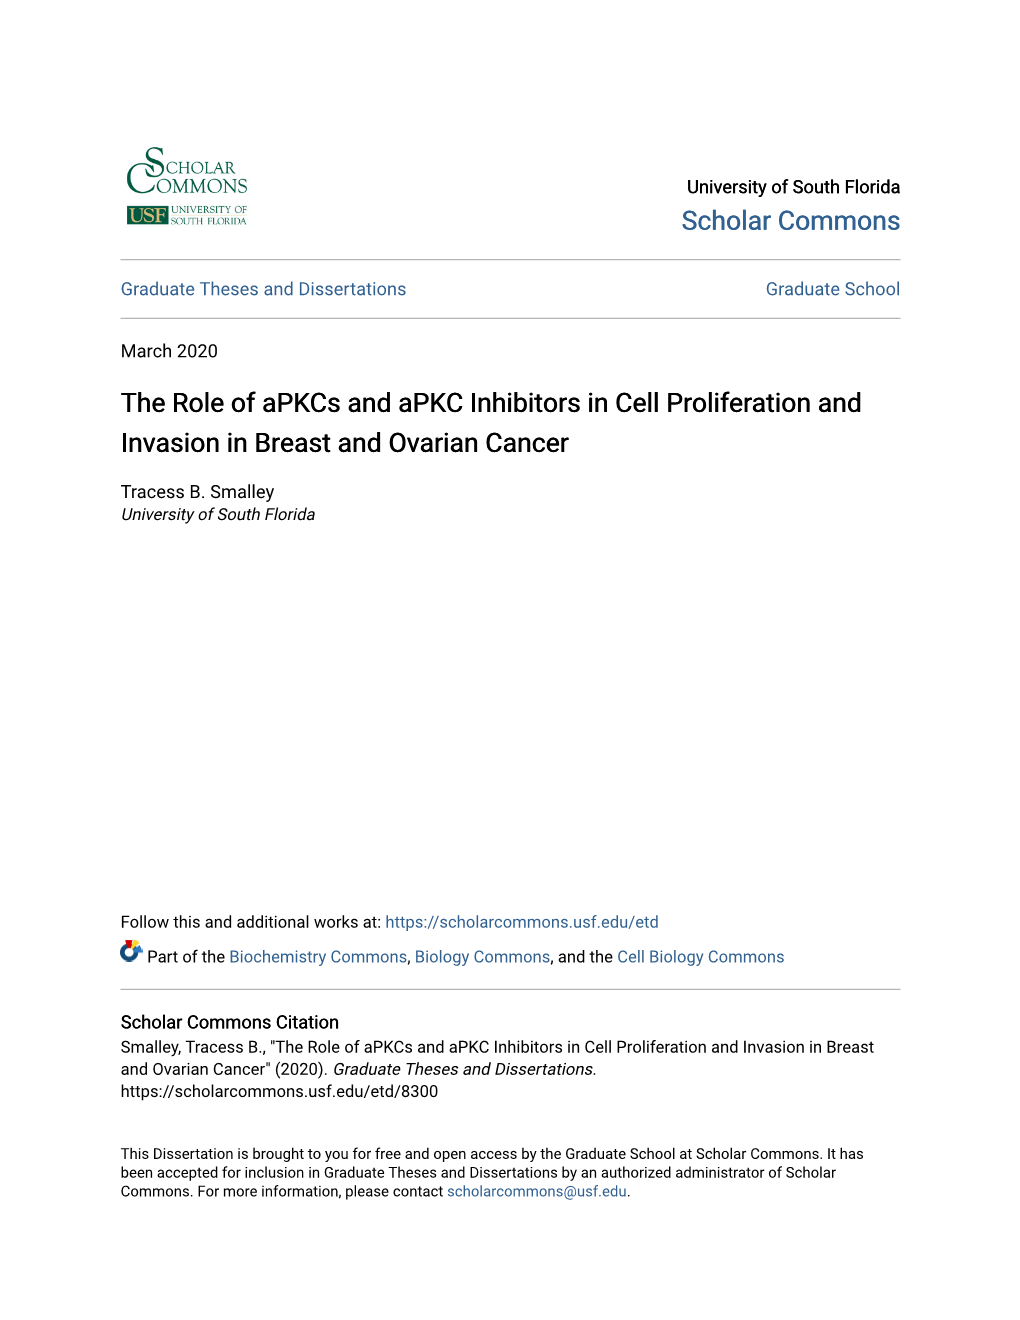 The Role of Apkcs and Apkc Inhibitors in Cell Proliferation and Invasion in Breast and Ovarian Cancer